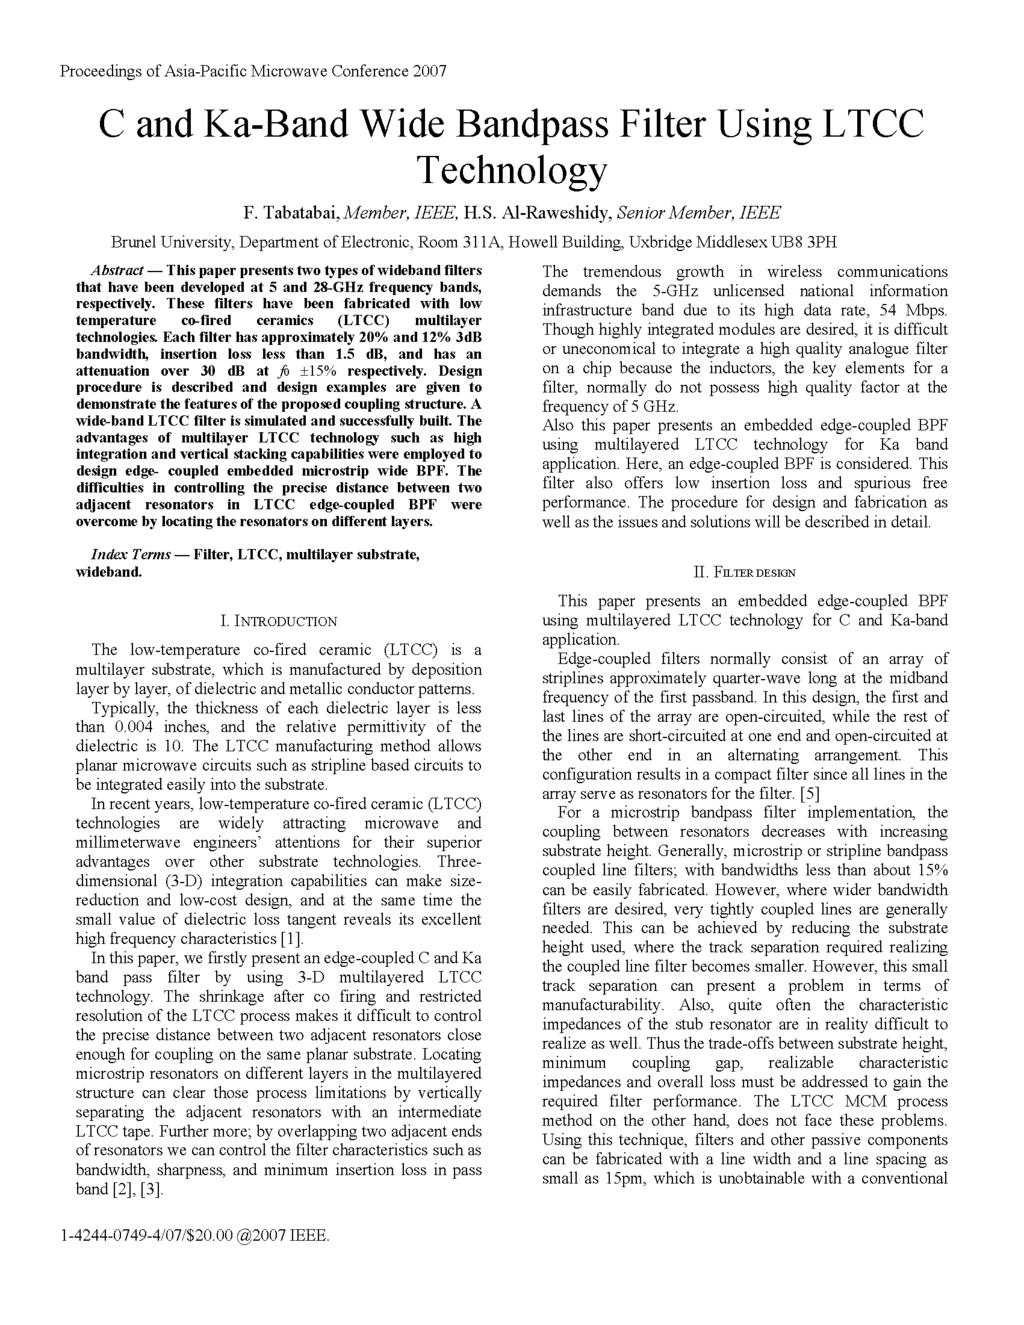 Proceedings of Asia-Pacific Microwave Conference 2007 C and Ka-Band Wide Bandpass Filter Using LTCC Technology F. Tabatabai, Member, IEEE, H.S.